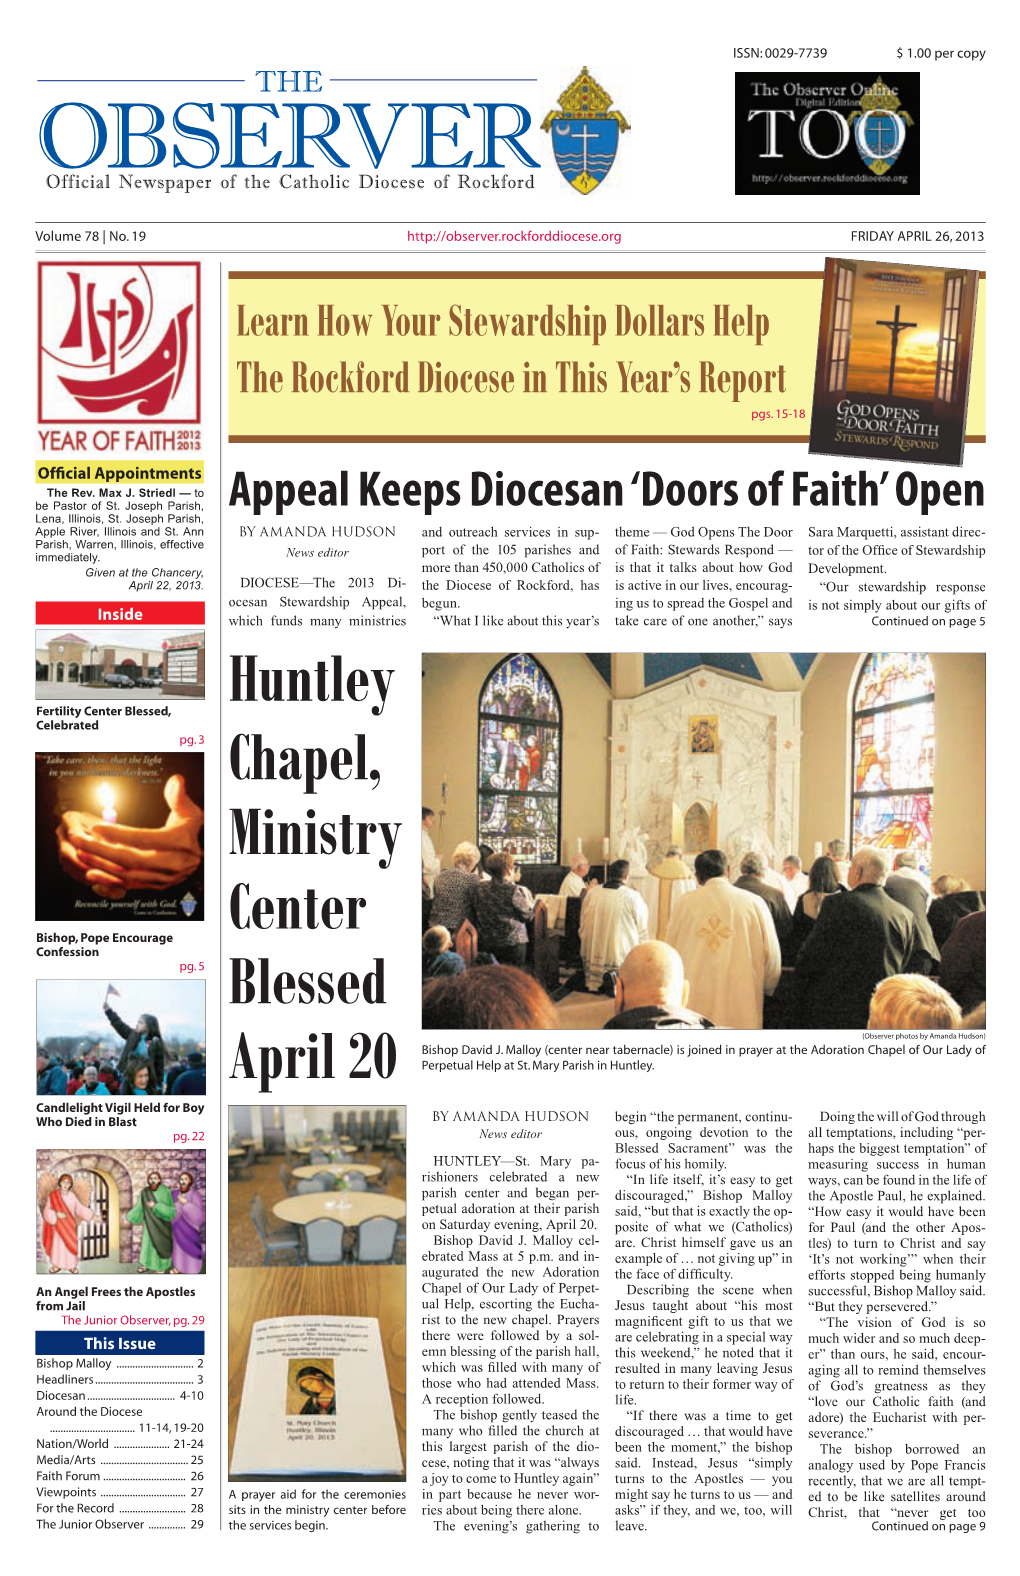 Huntley Chapel, Ministry Center Blessed April 20 from Page 1 Room (Also Used for Religious Close” to Him